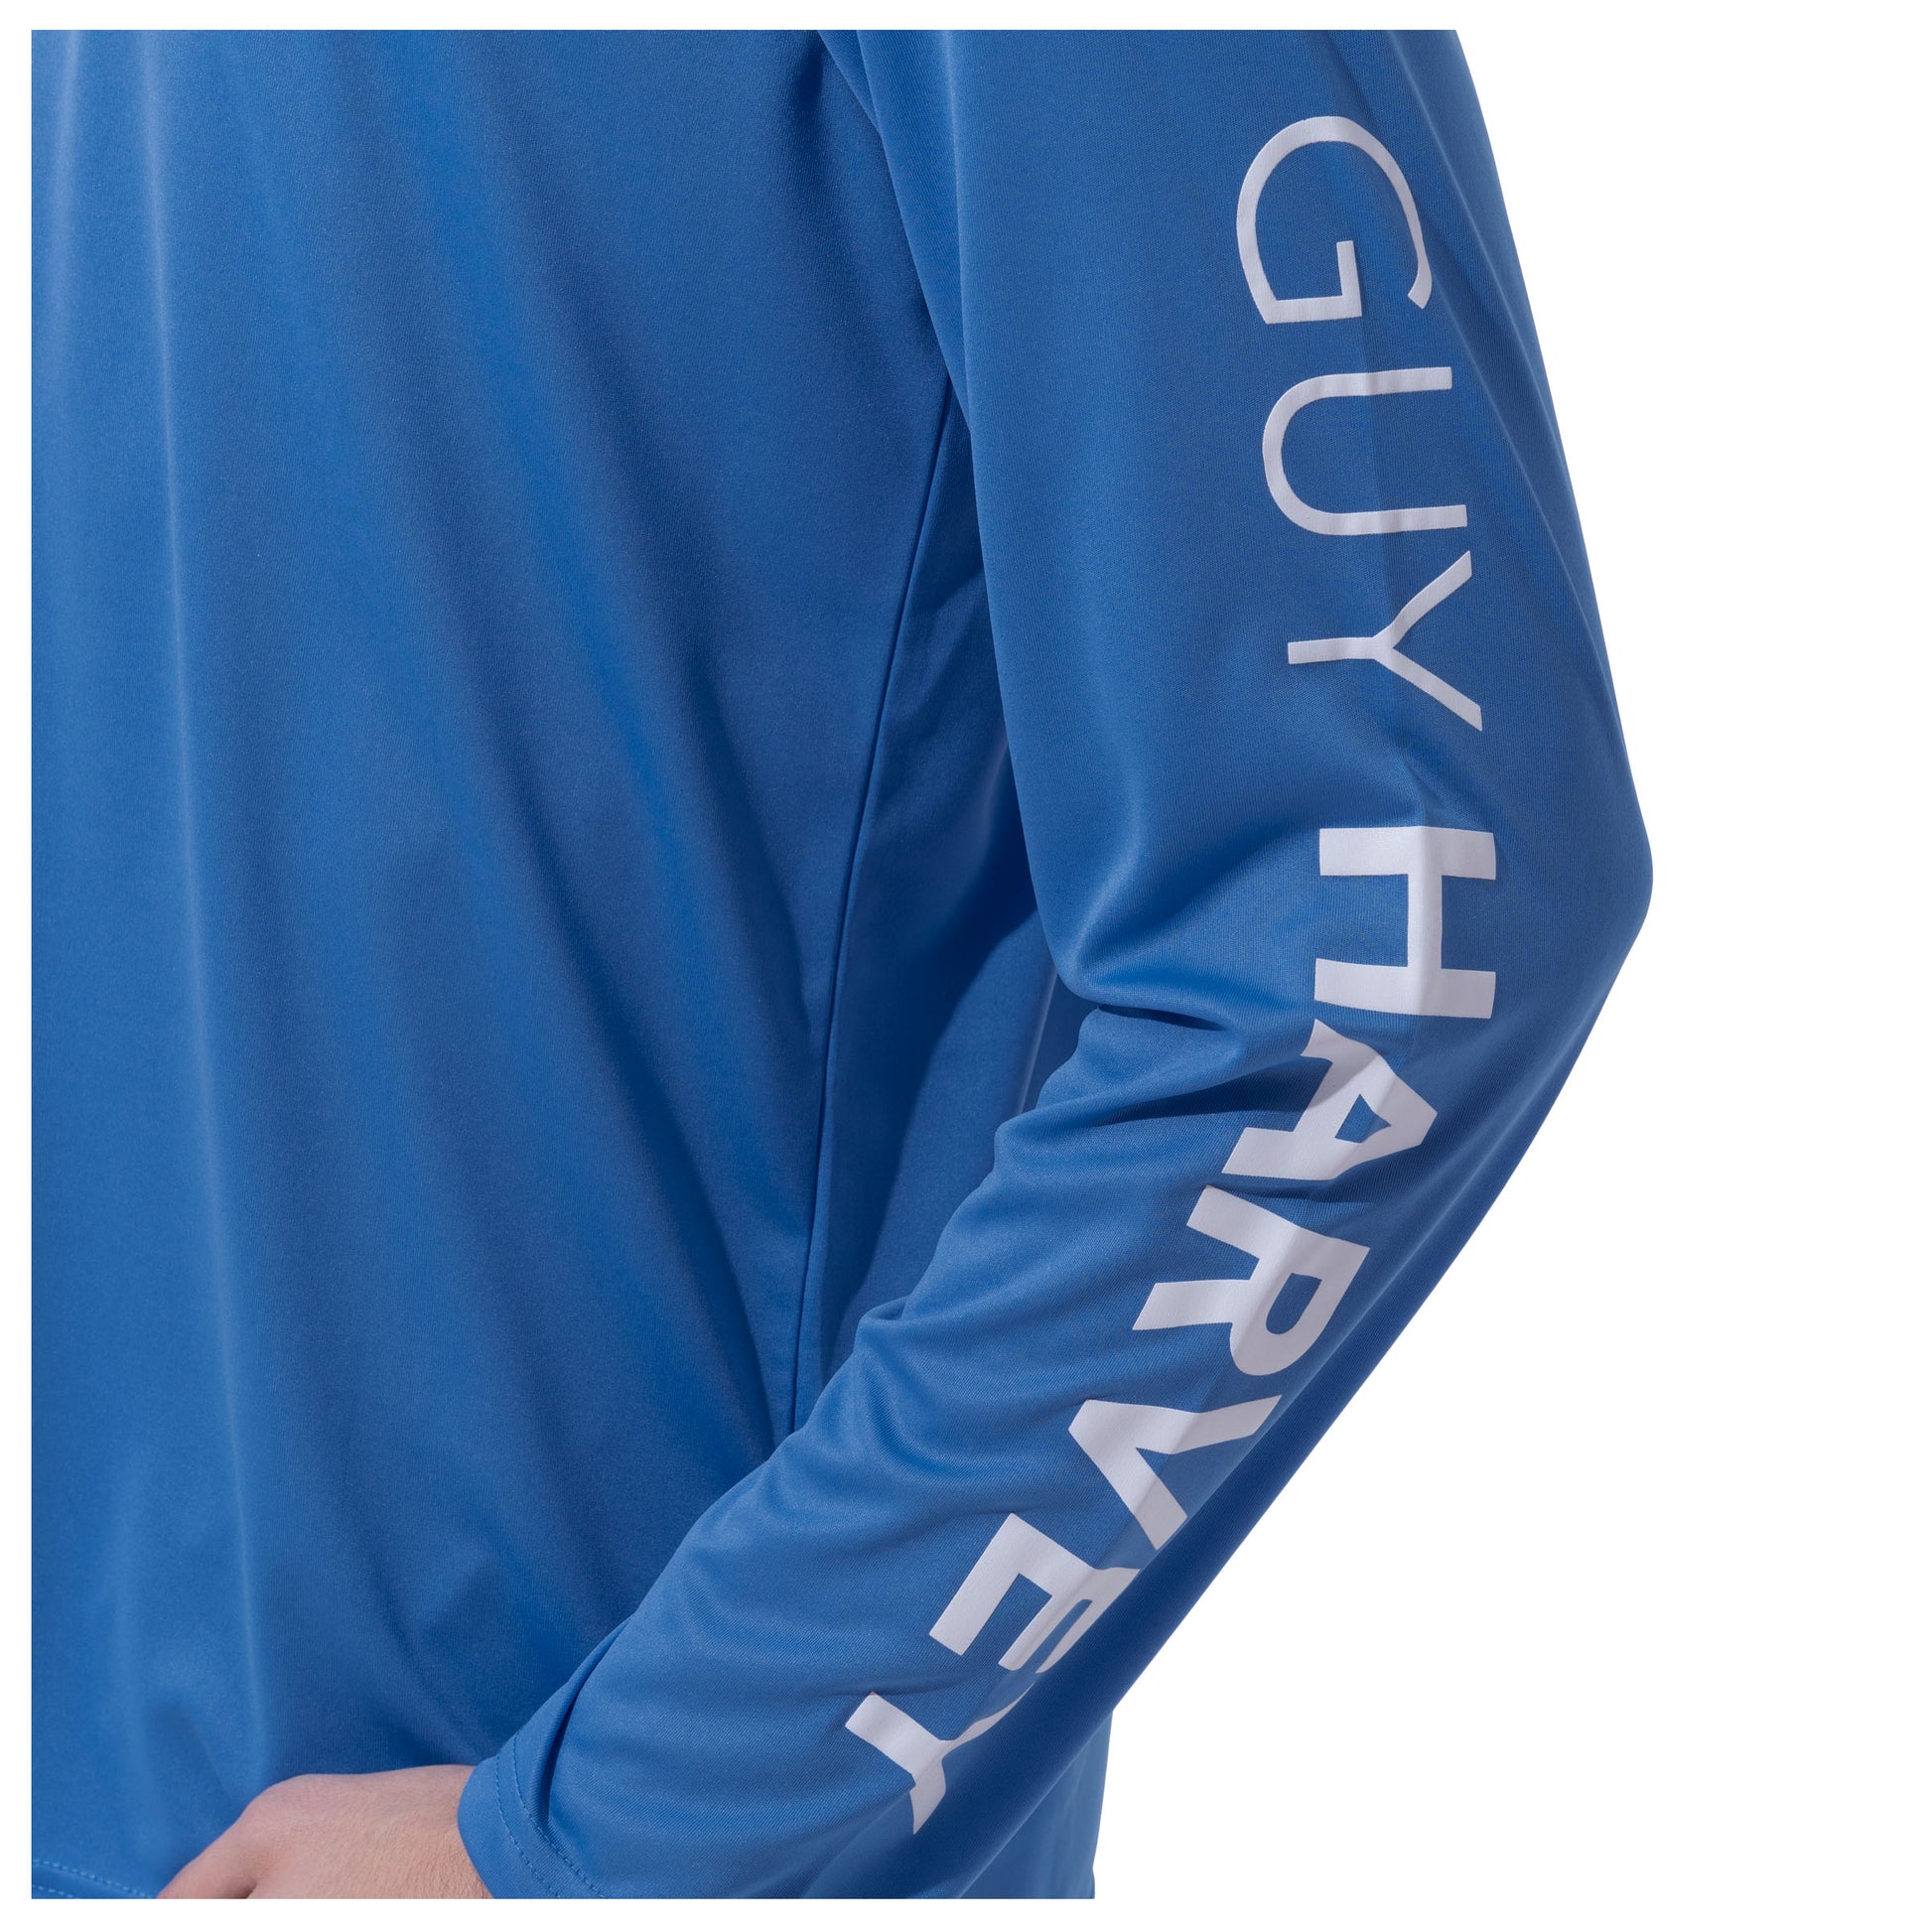 Men Long Sleeve Performance Fishing Sun Protection with UPF 50 Plus. Color Blue Sleeve has Guy Harvey text